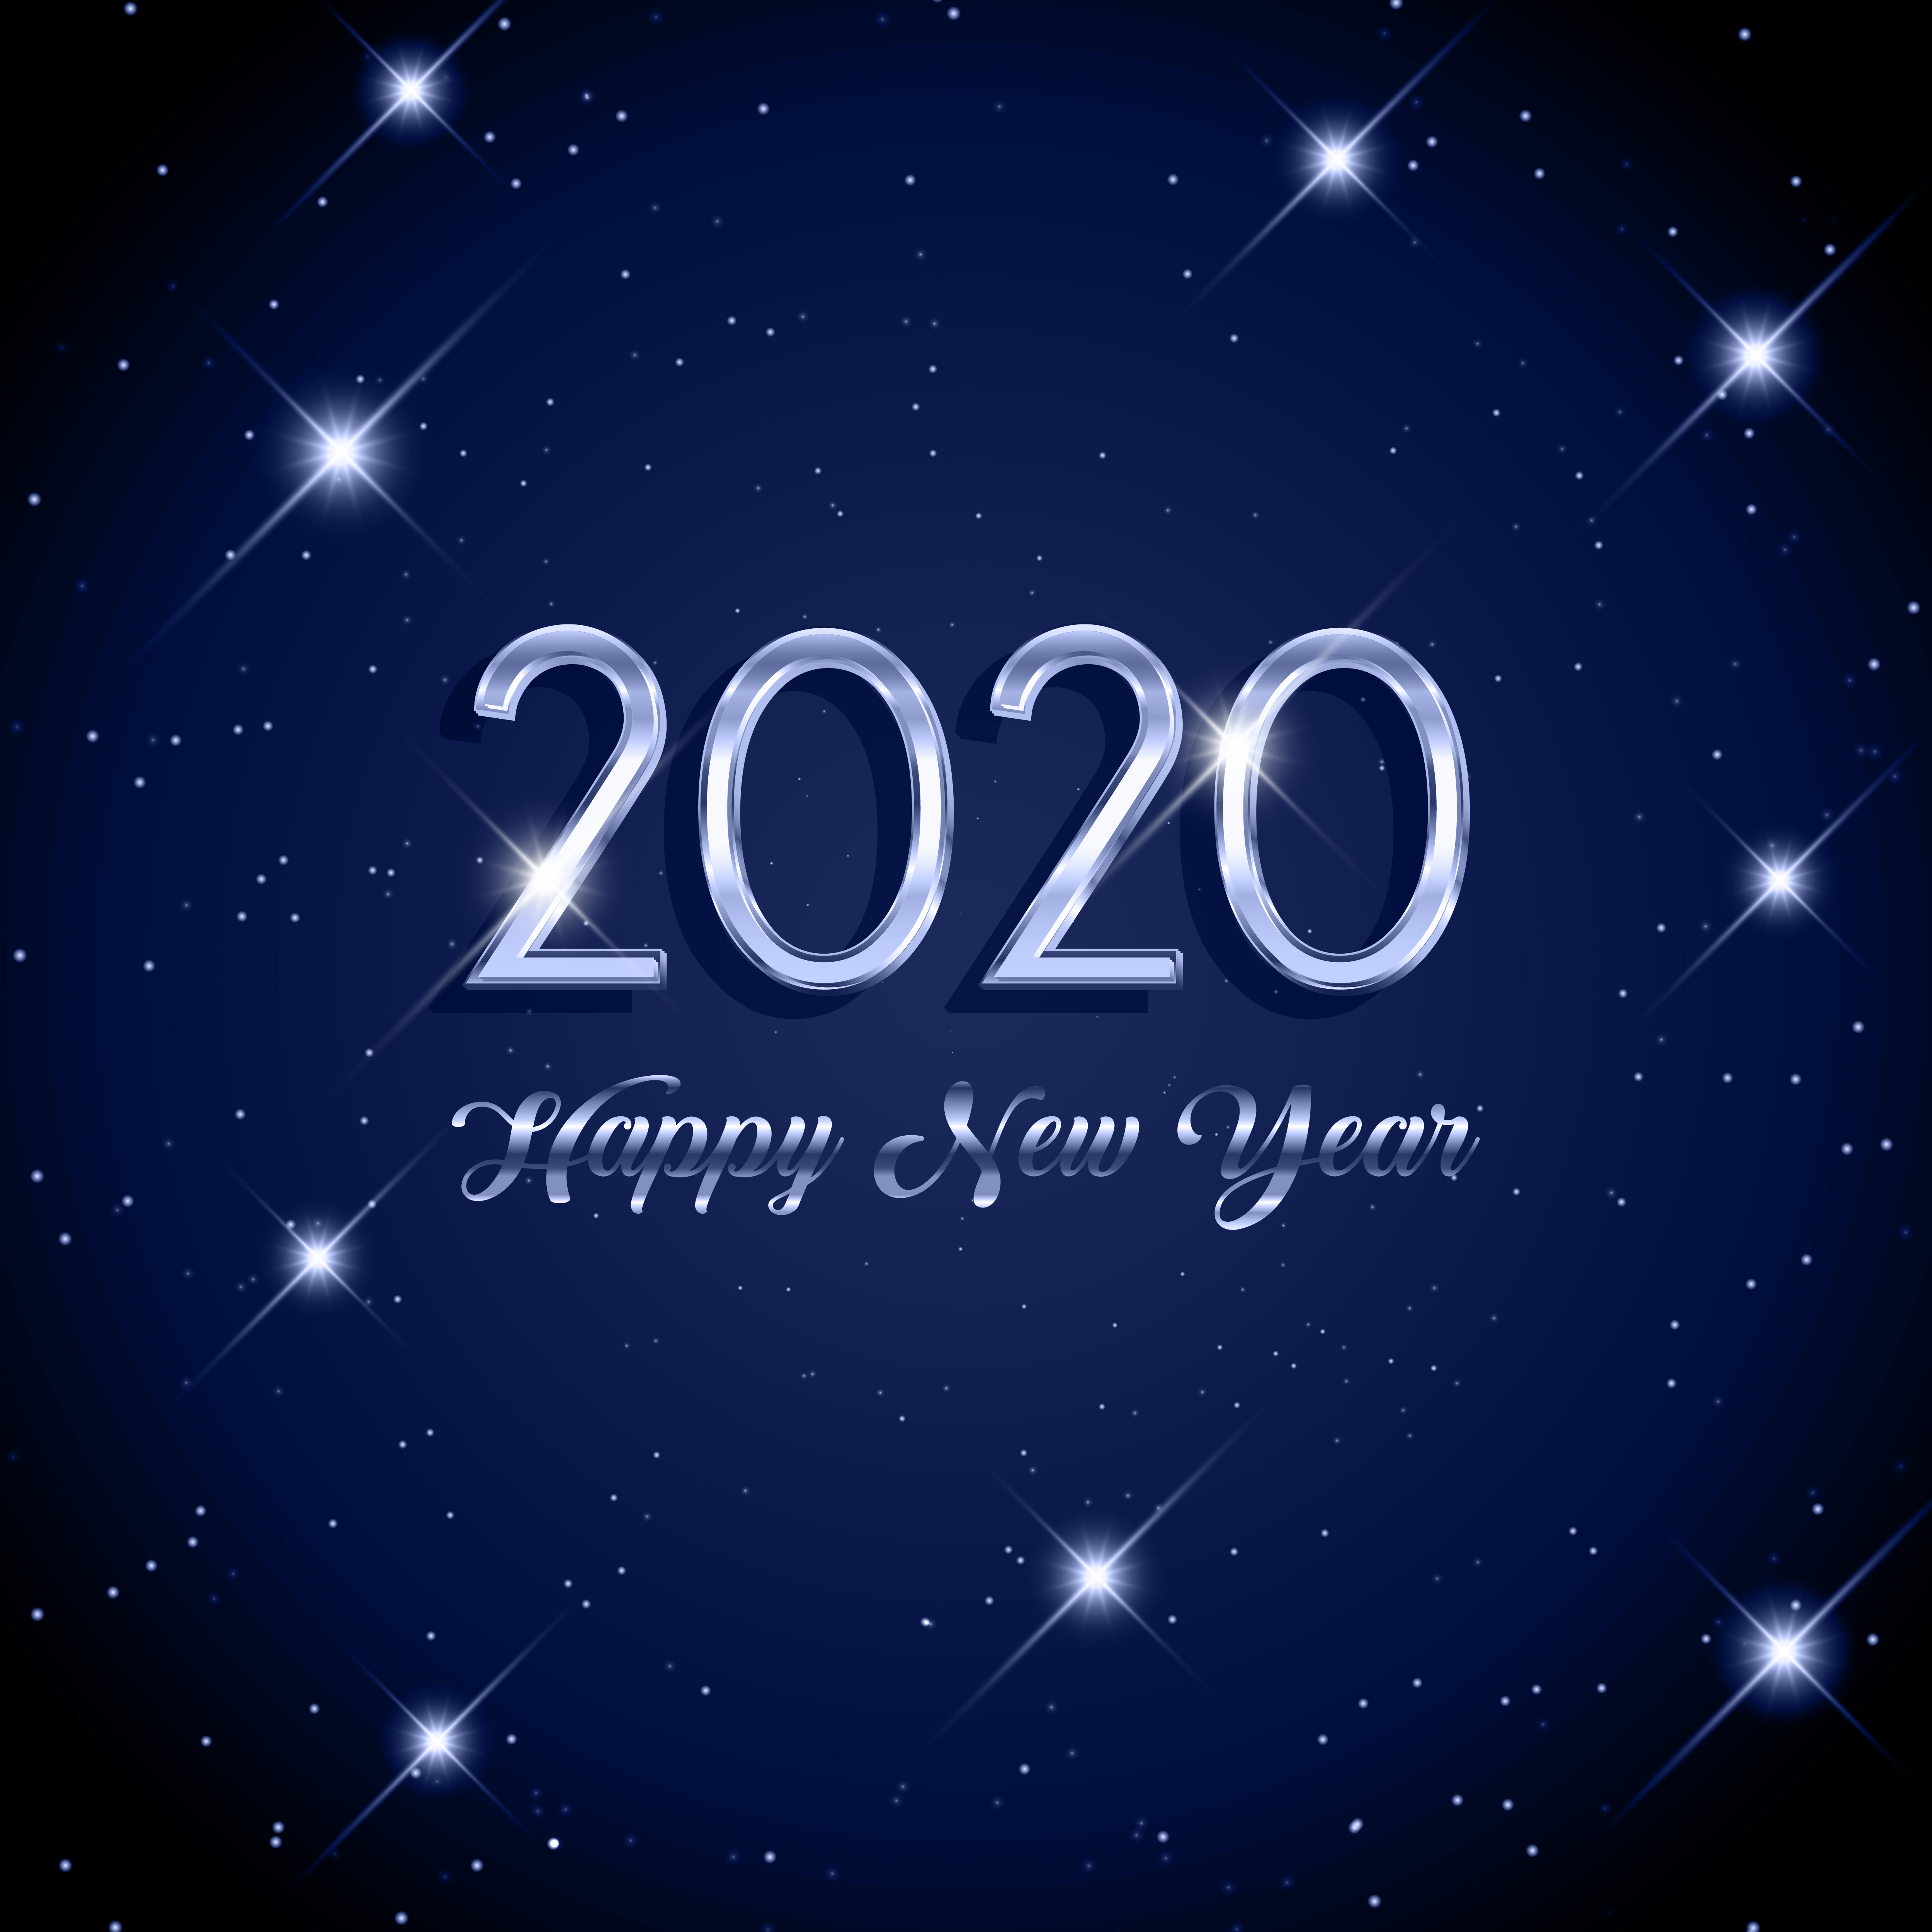 Happy New Year starry background